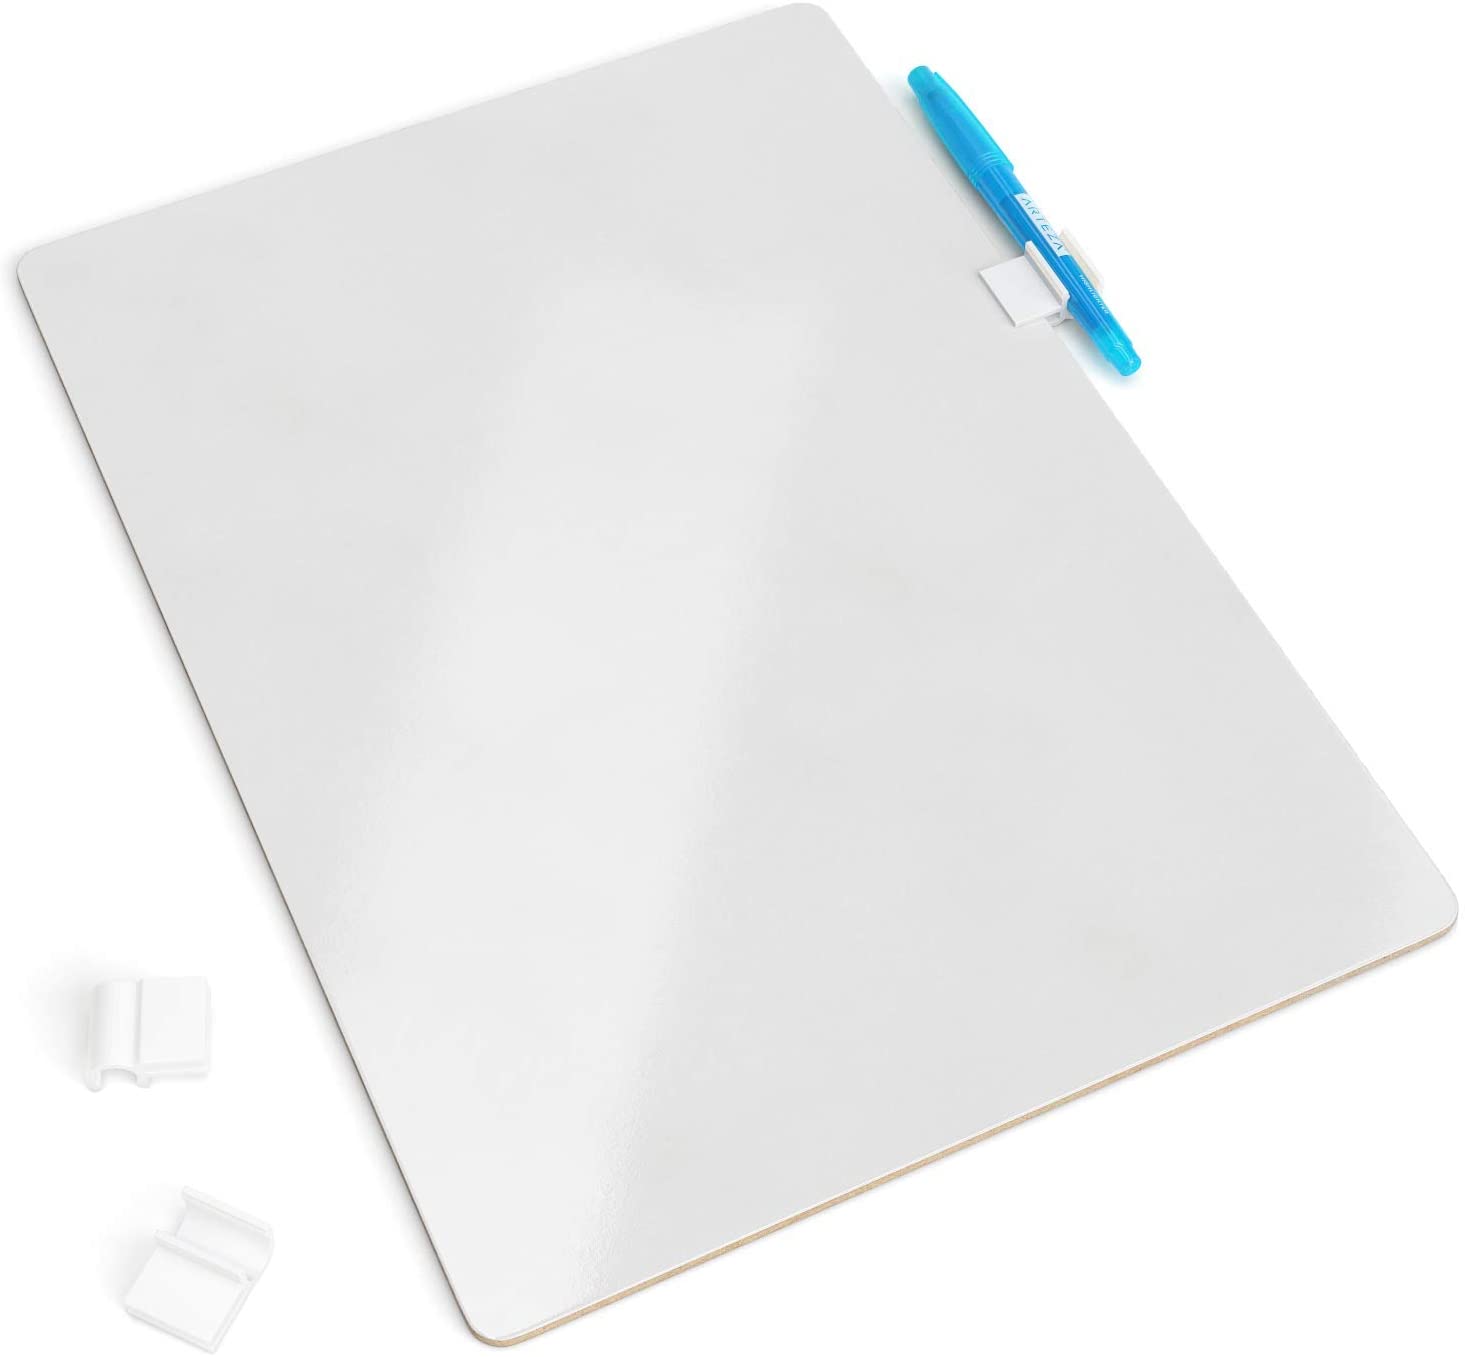 Essentials Dry Erase Lap Boards 9 x 12 Inches Pack of 24